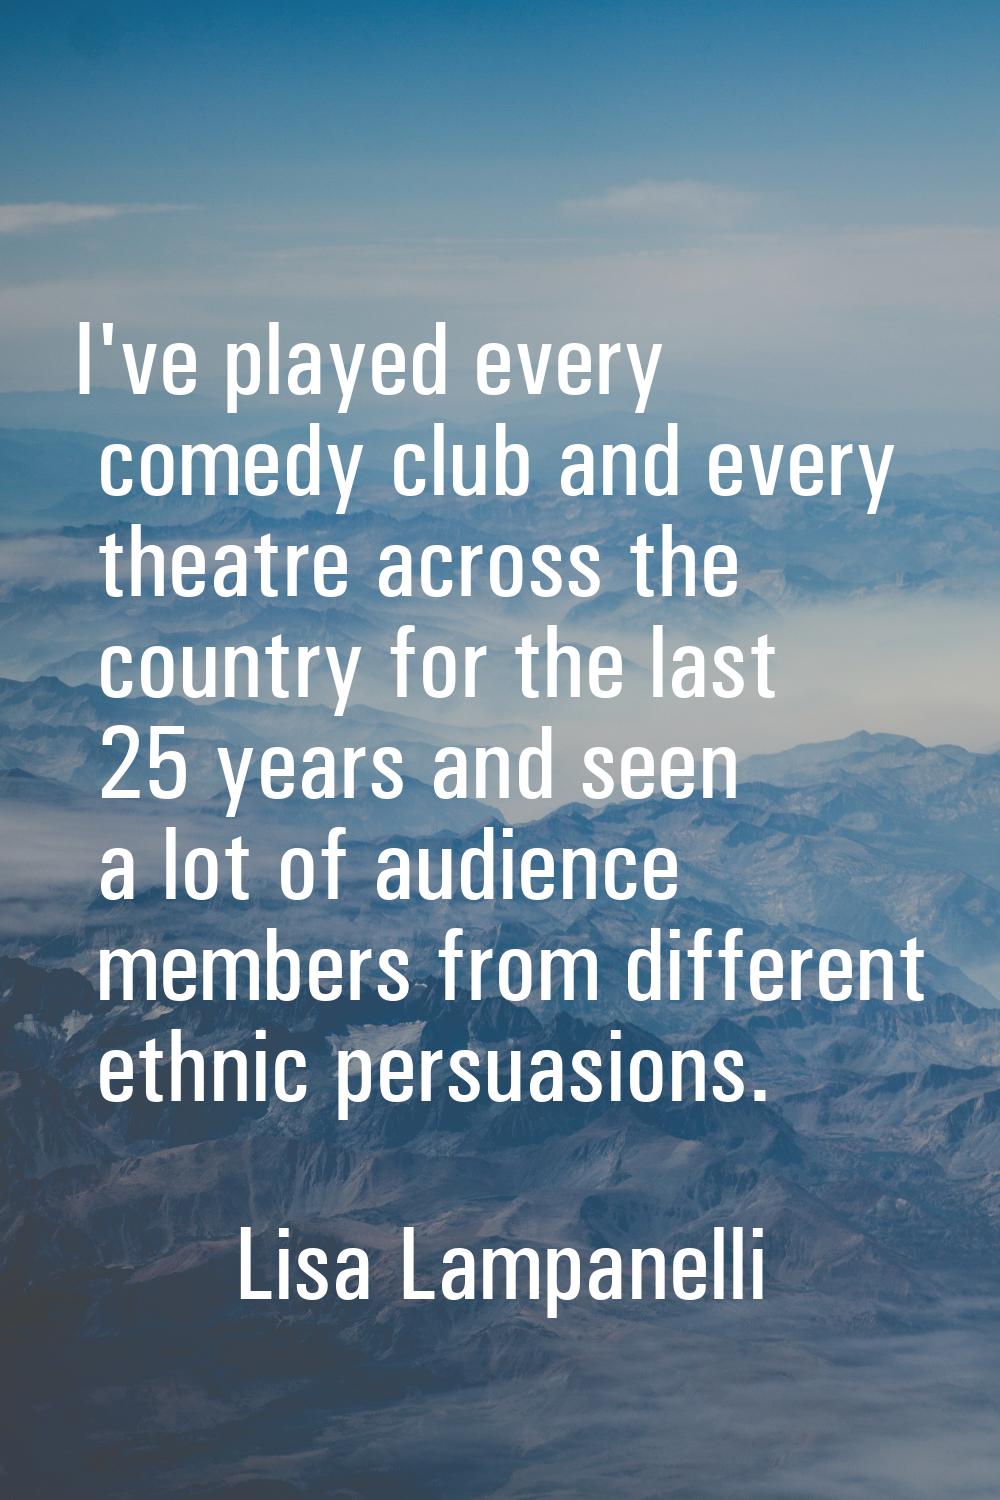 I've played every comedy club and every theatre across the country for the last 25 years and seen a